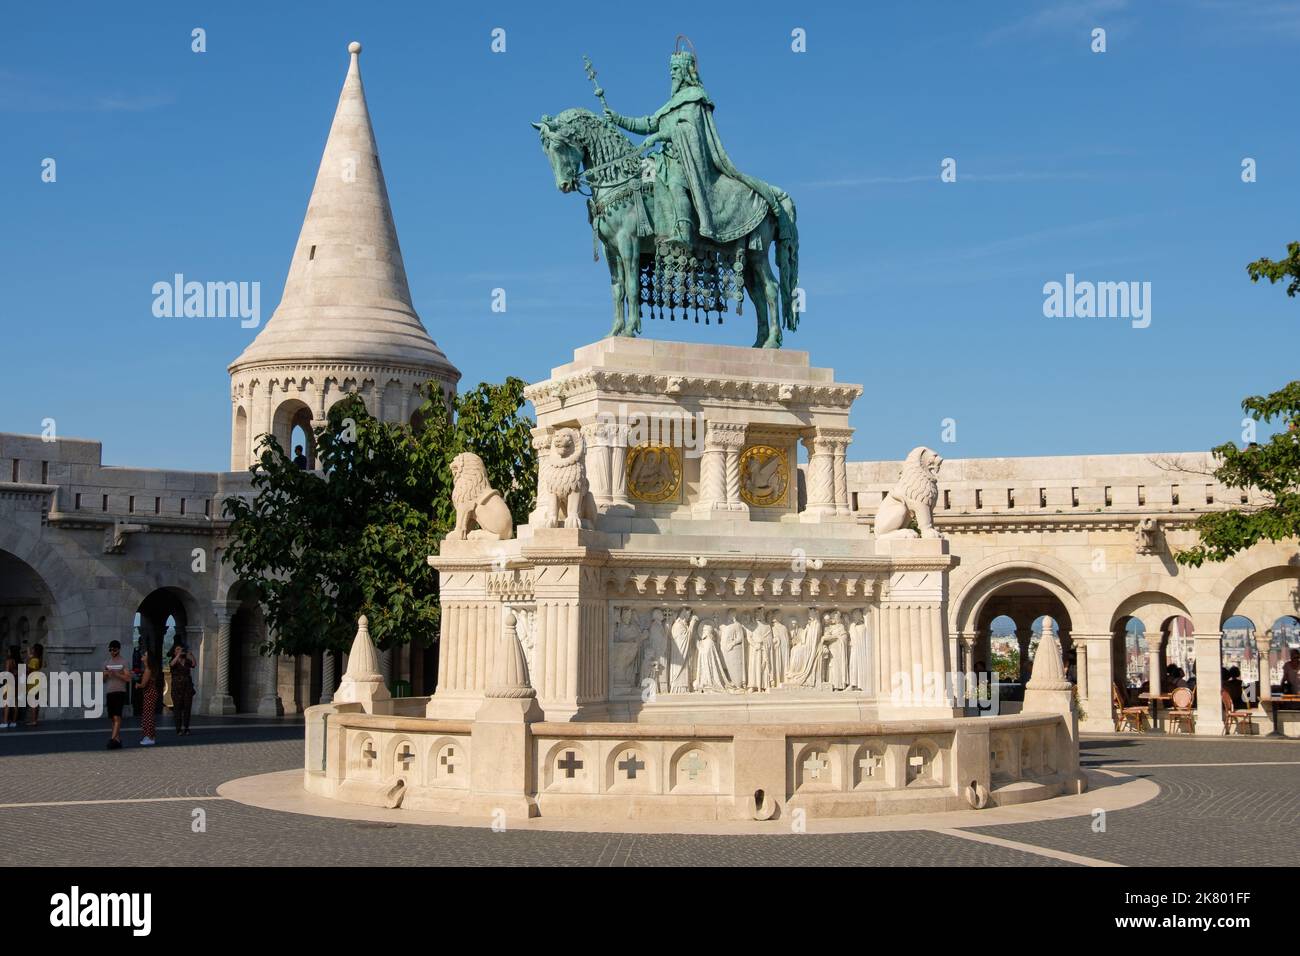 Bronze equestrian statue of St Stephen at Fishermans Bastion - Budapest, Hungary Stock Photo